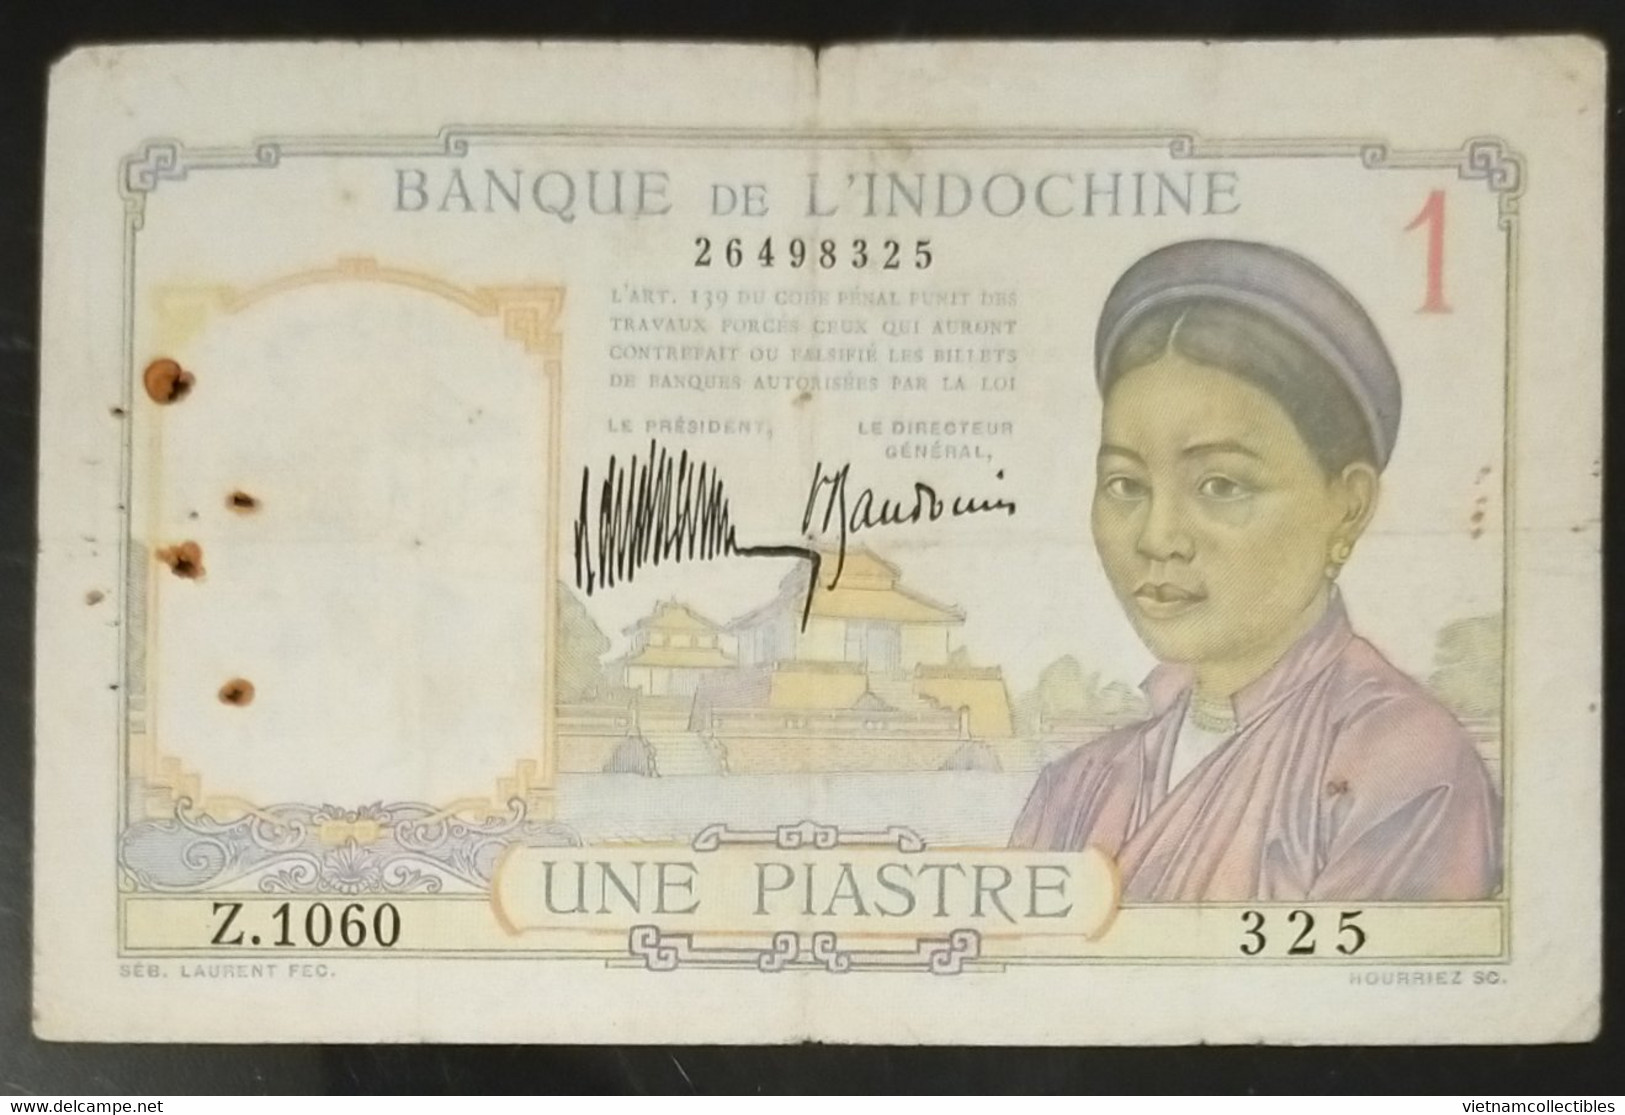 French Indochina Indo China Indochine Vietnam Cambodia 1 Piastre VF Banknote Note / Billet - Pick # 54a Laos Text - Indochina